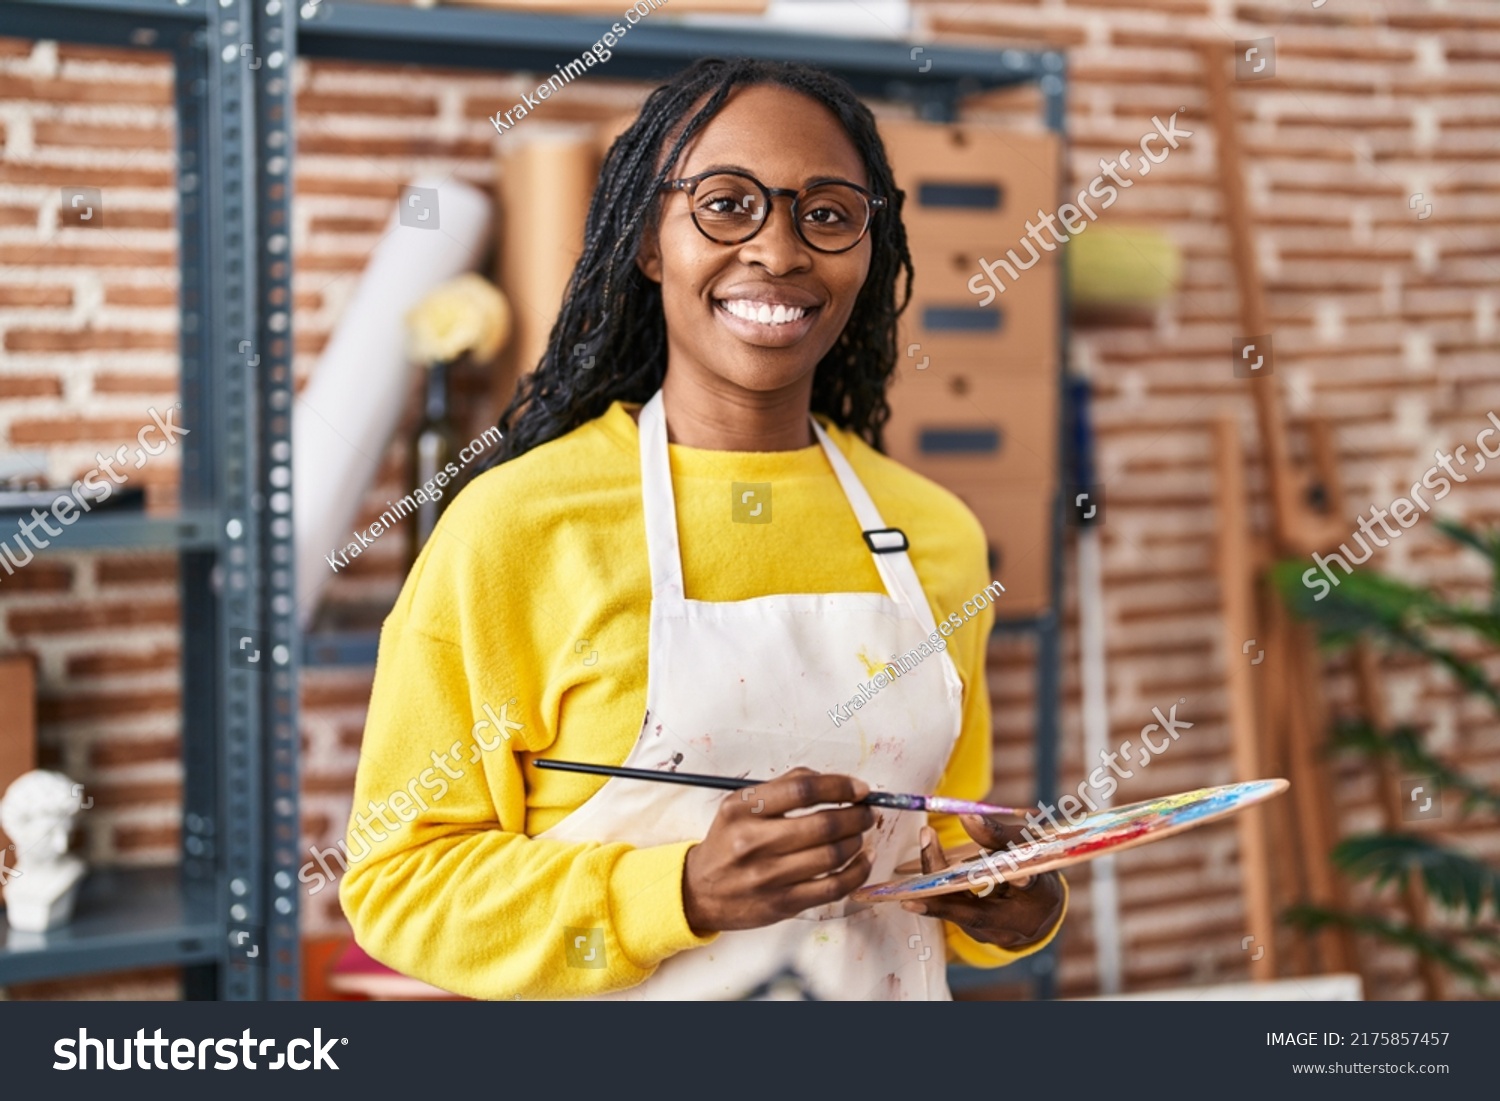 African american woman artist smiling confident holding paintbrush and palette at art studio #2175857457